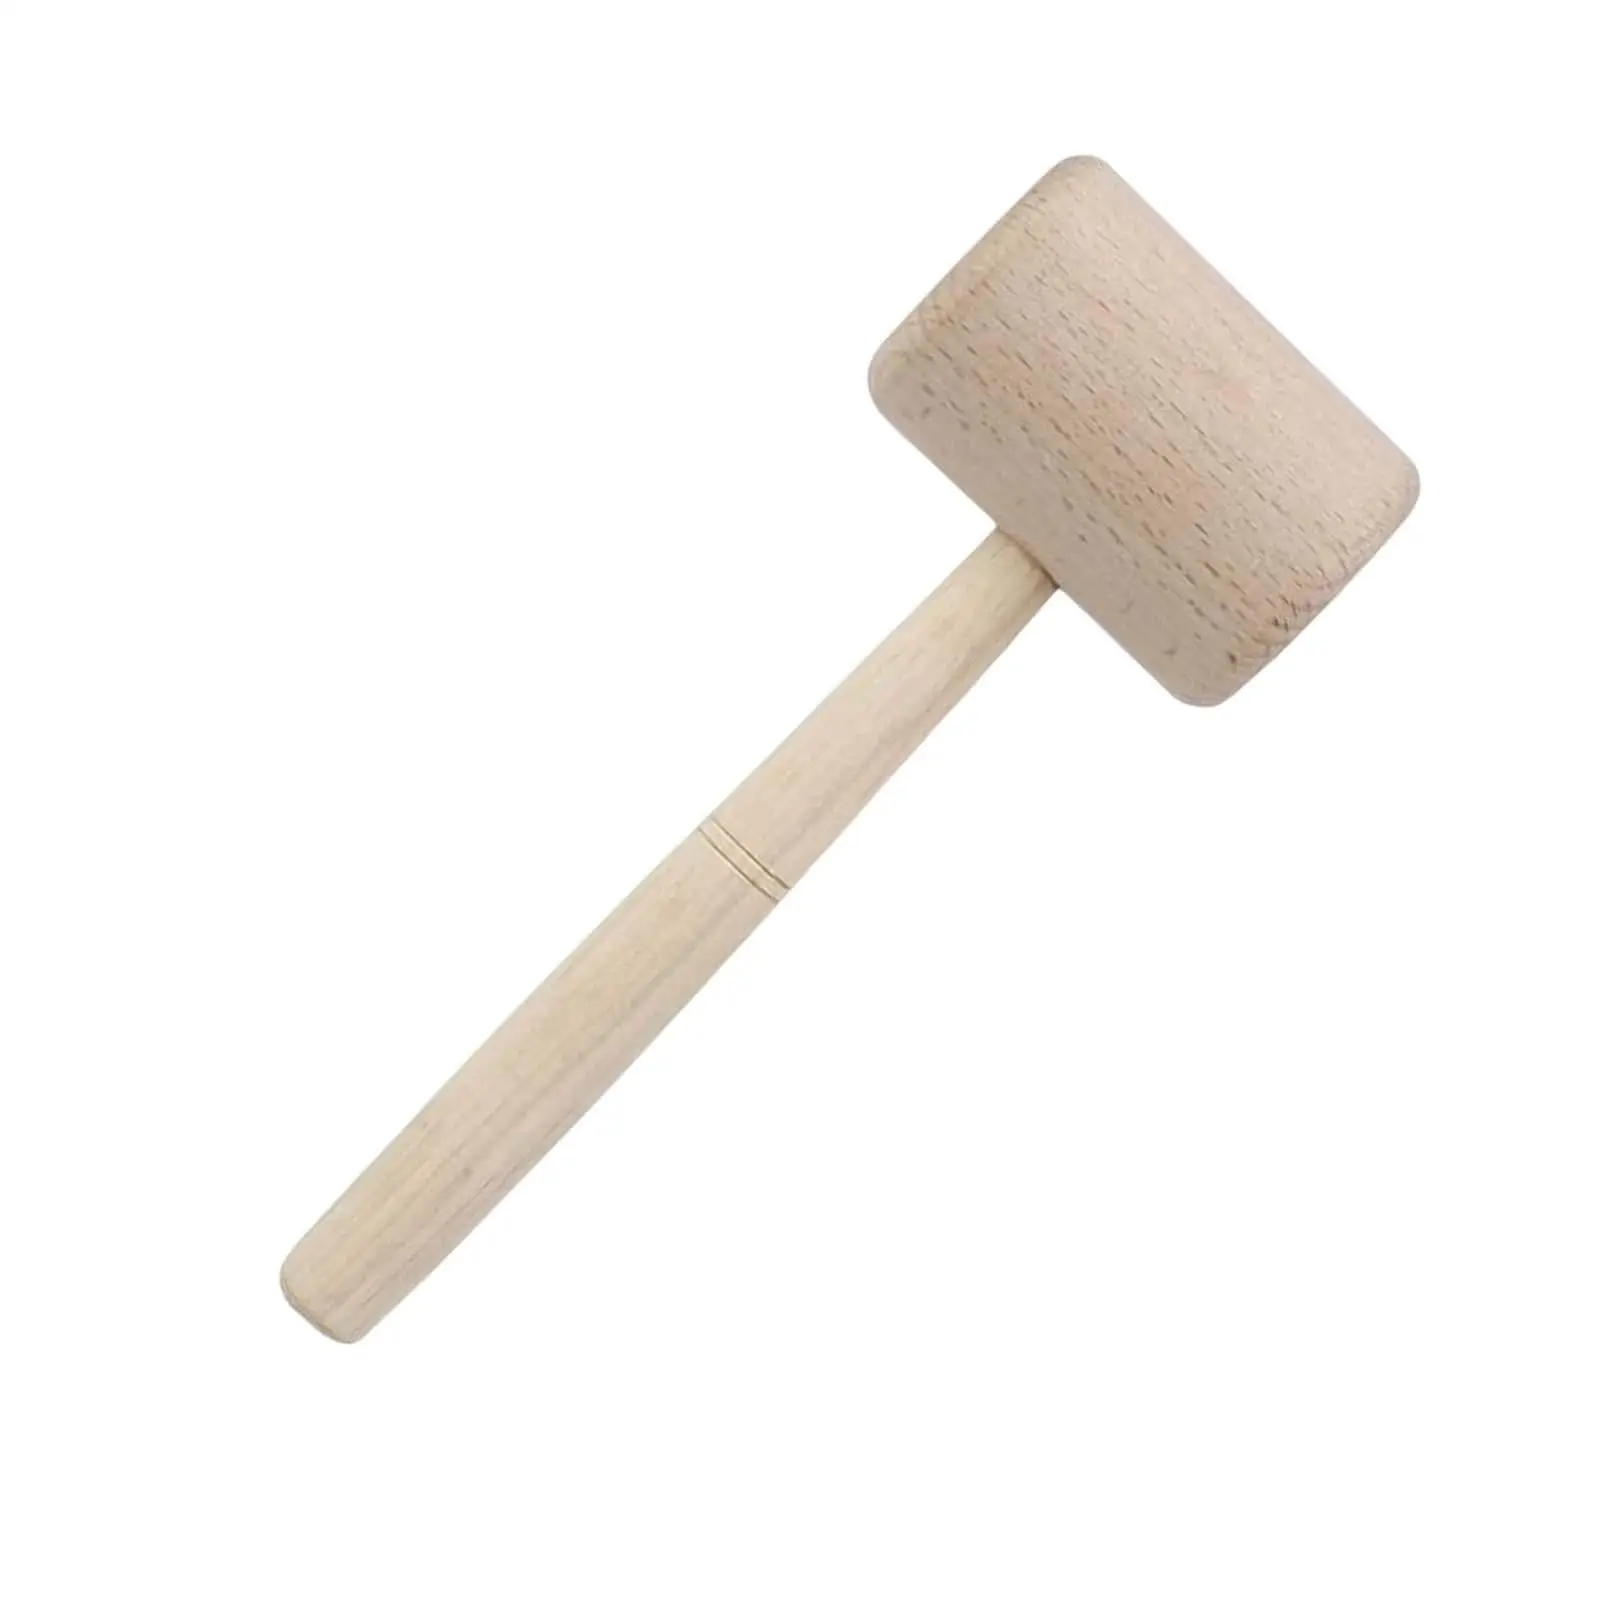 Wooden Mallet Hammer Woodworking Hammer Shock Resistance Wood Hand Tool Beechwood Woodworking Tool Wooden Mallet for Carving DIY